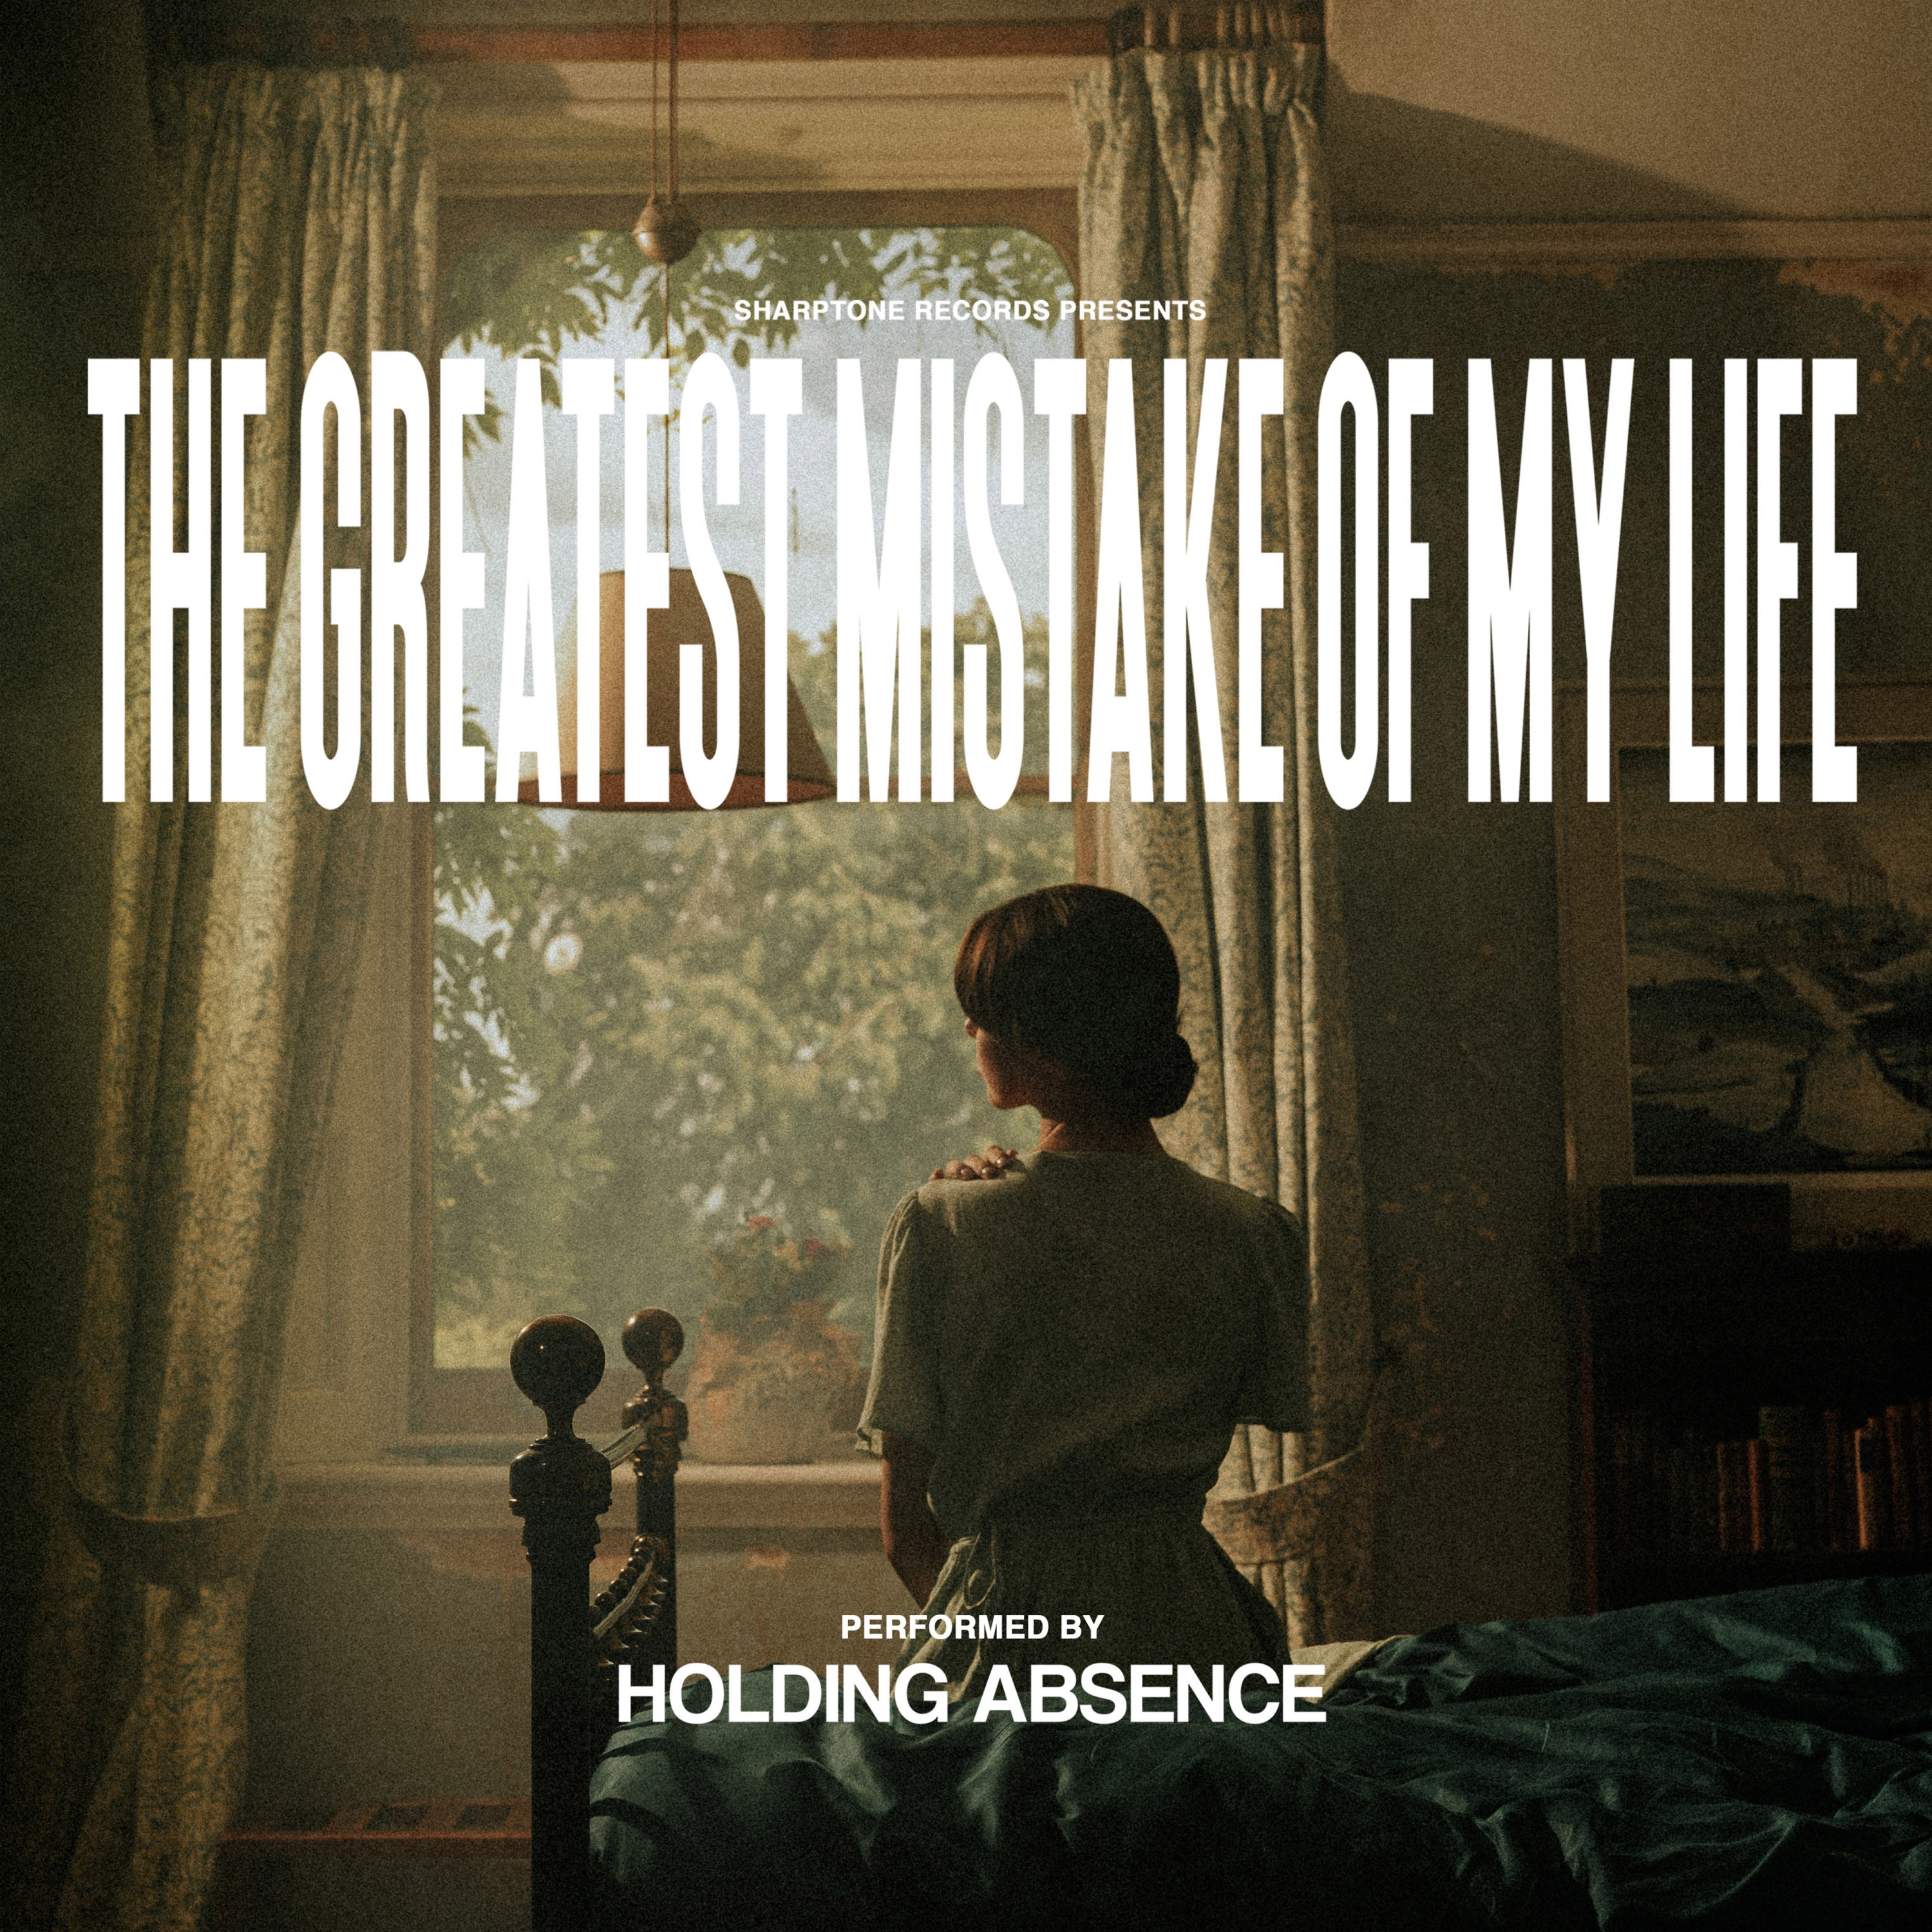 The day my mother made an apology. Holding absence Afterlife. Die Alone (in your lover's Arms) holding absence. Holding absence die Alone (in your lover's Arms) текст. The Greatest mistake of my Life.